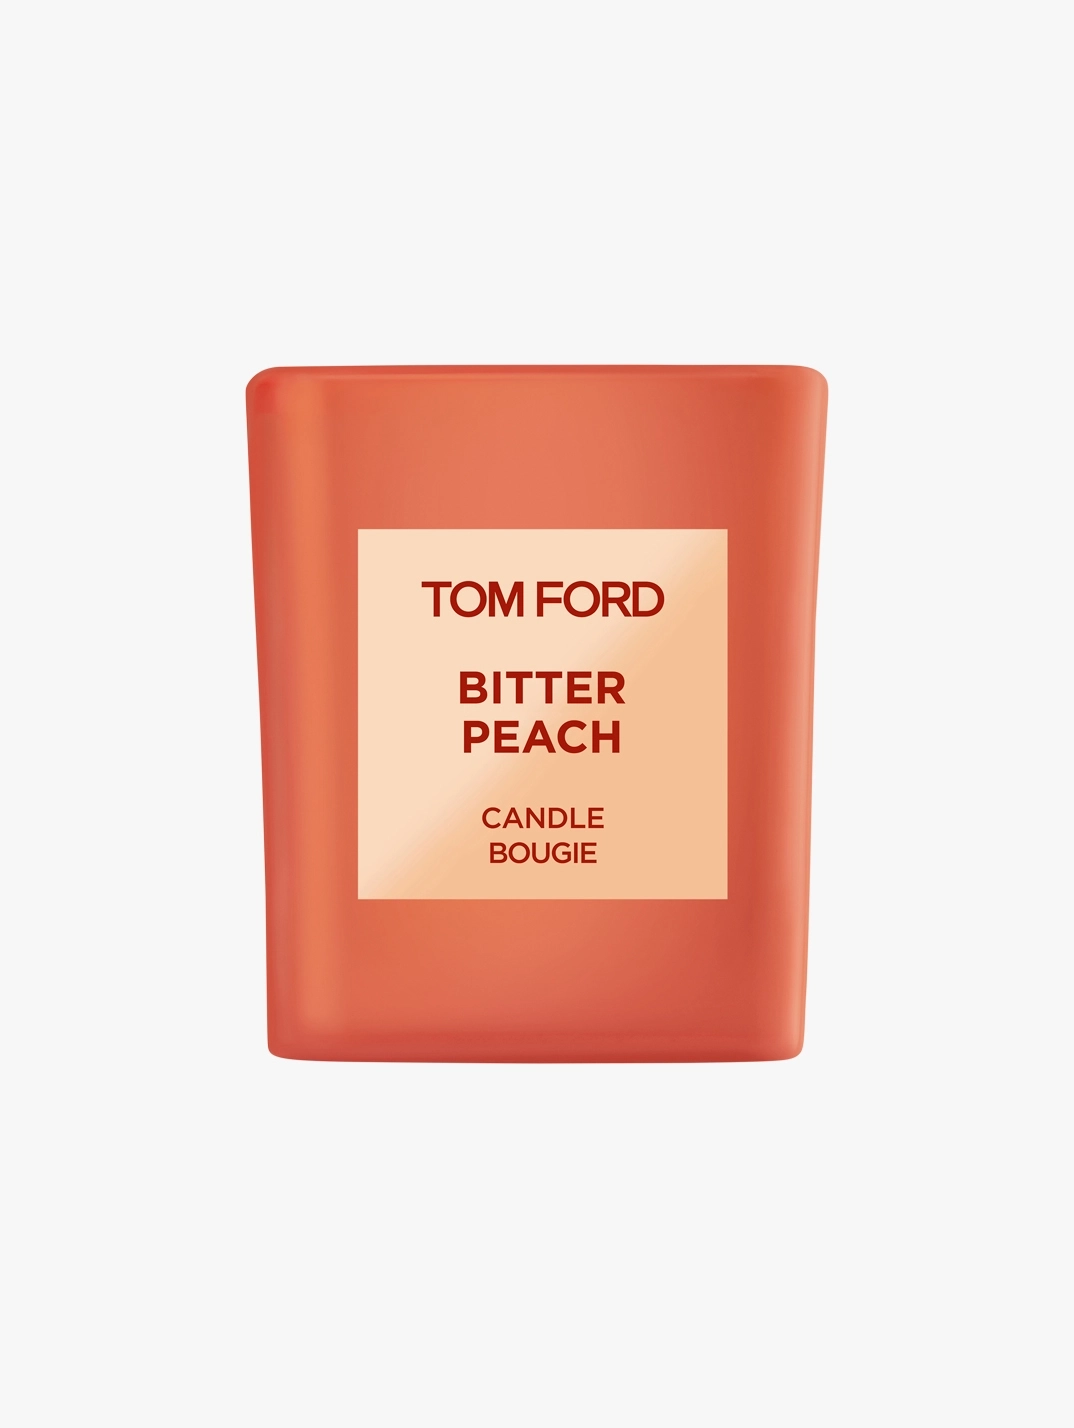 Tom Ford candle